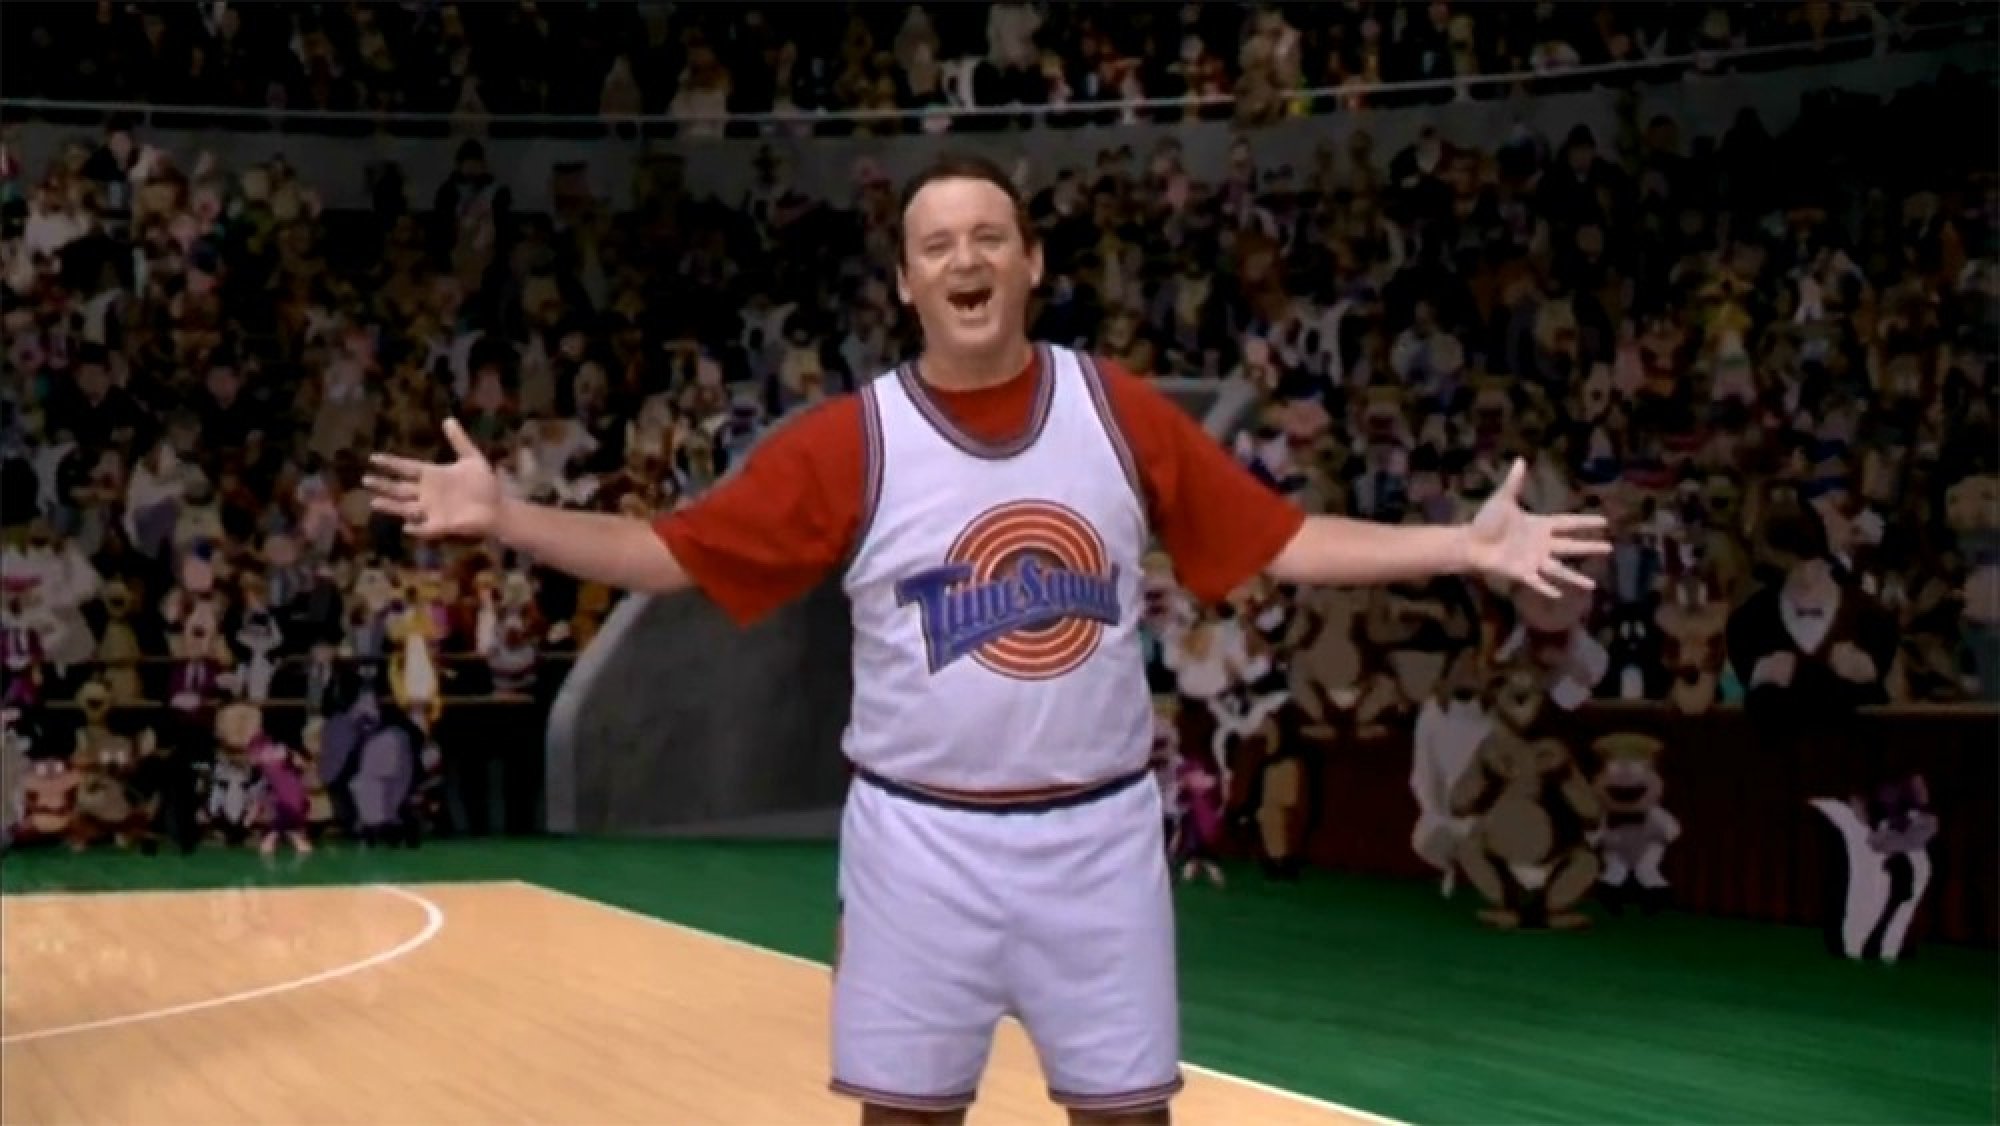 Bill Murray gave away 1000 “Space Jam” jersey at the Ball Game